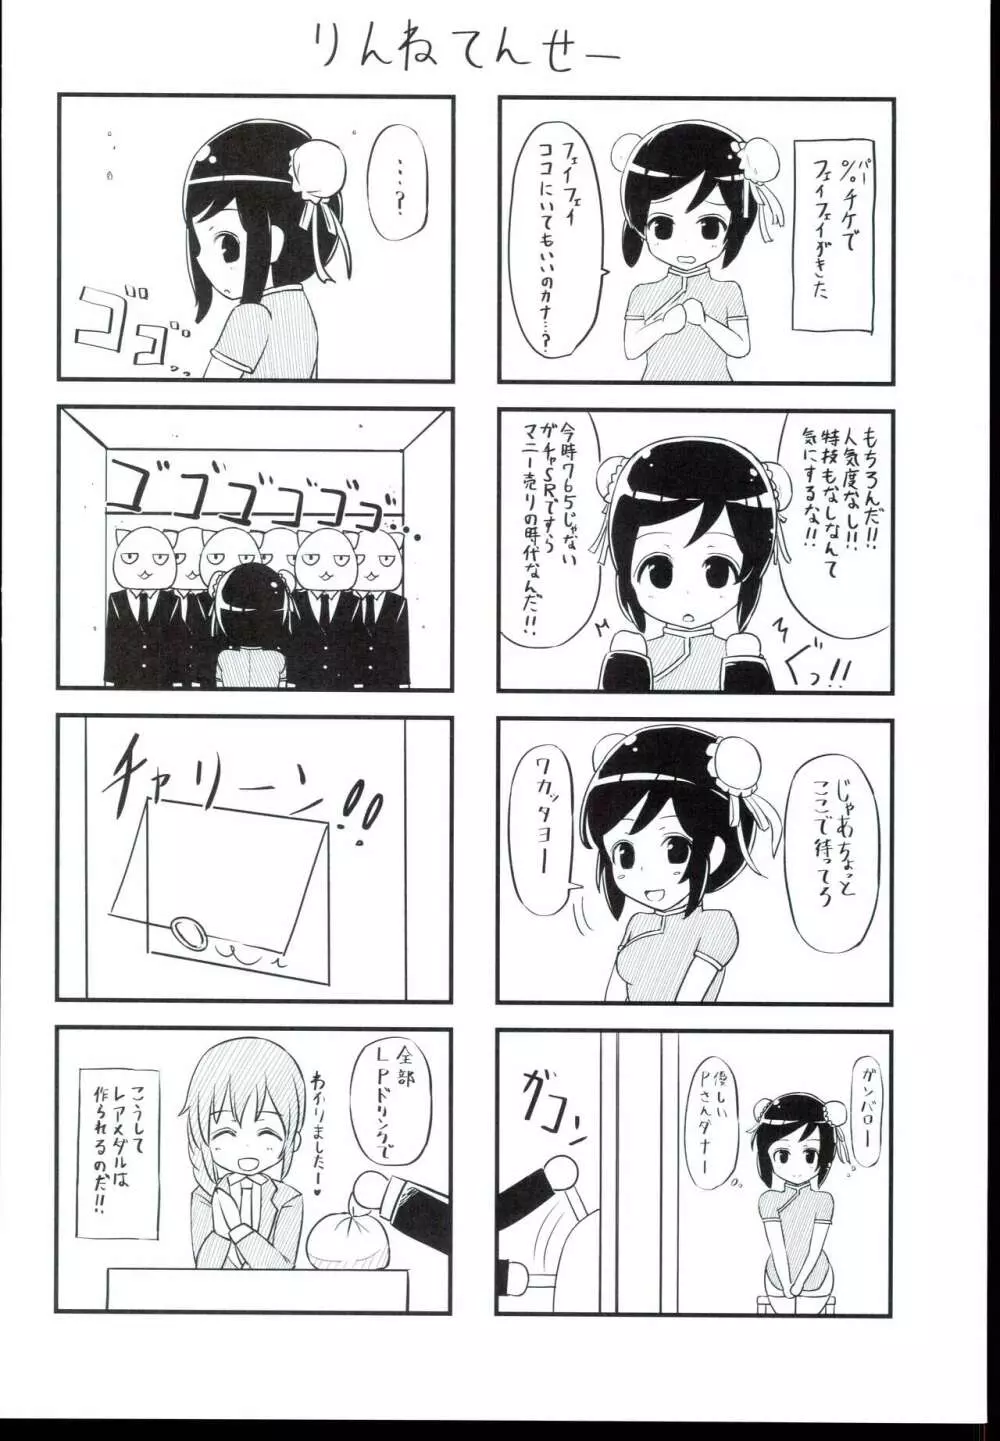 ふみふみ？ふみふみ。ふみふみ…ふみふみ!! - page20